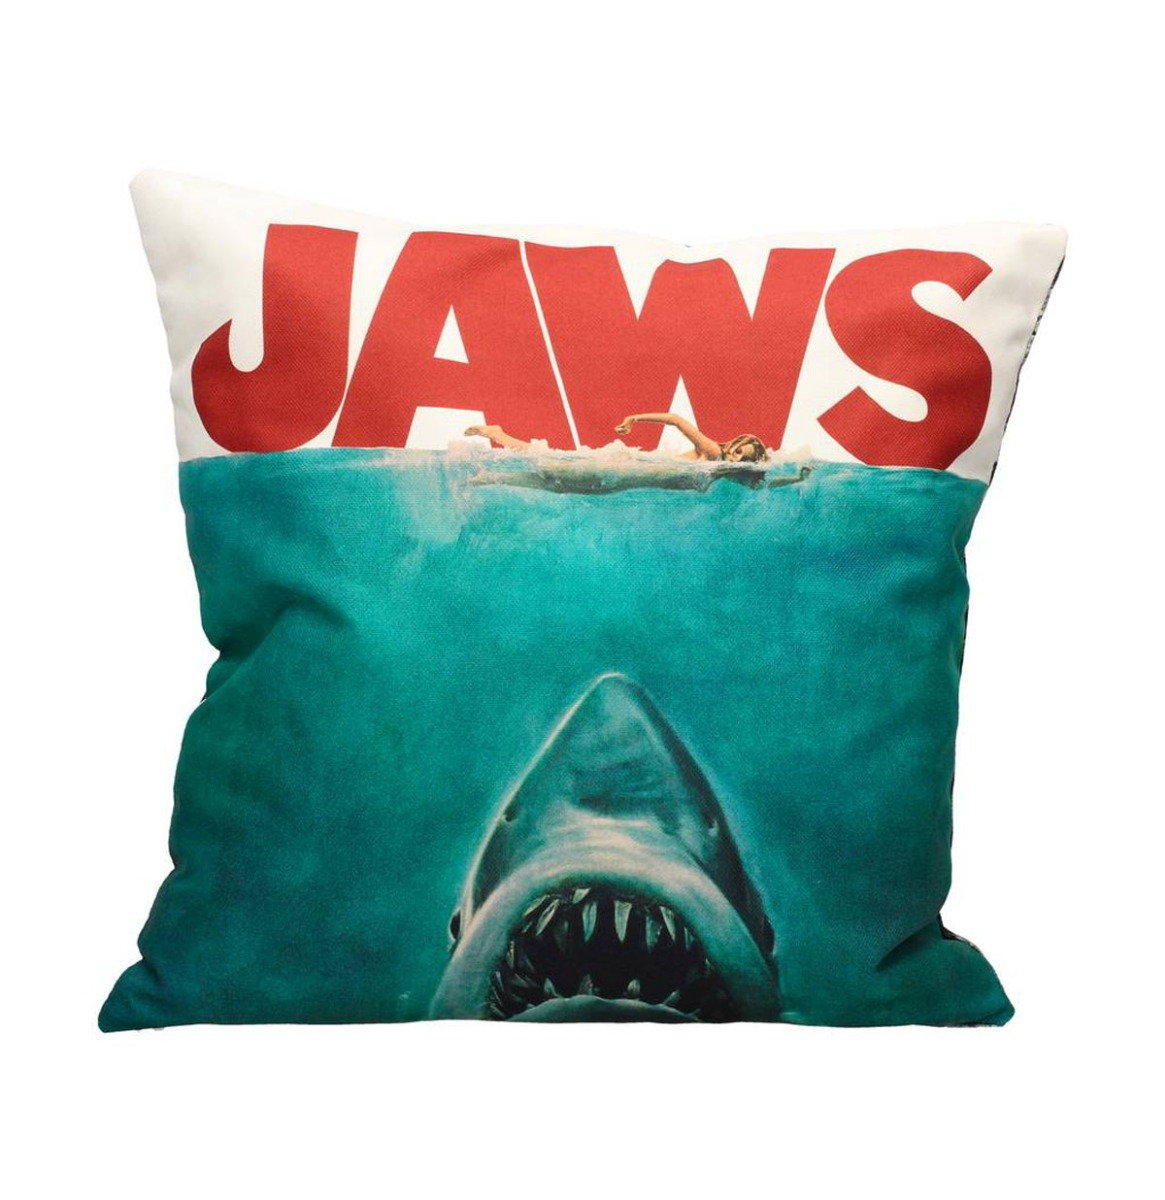 Jaws: Poster Collage Vierkant Kussen